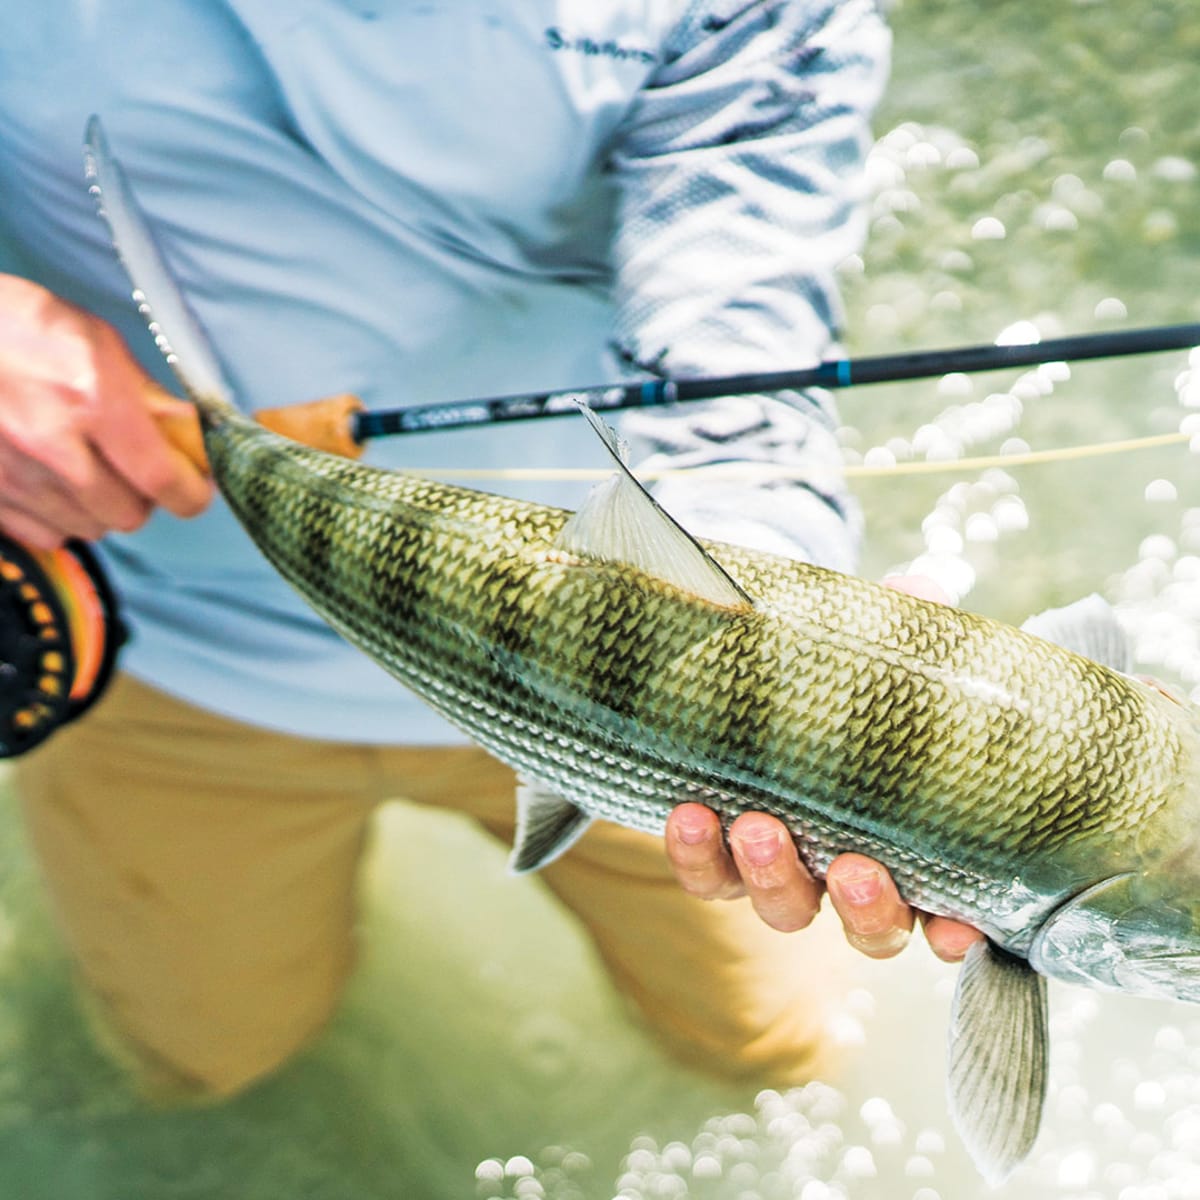 The 7 Essential Saltwater Fly Fishing Gear Items Every Angler